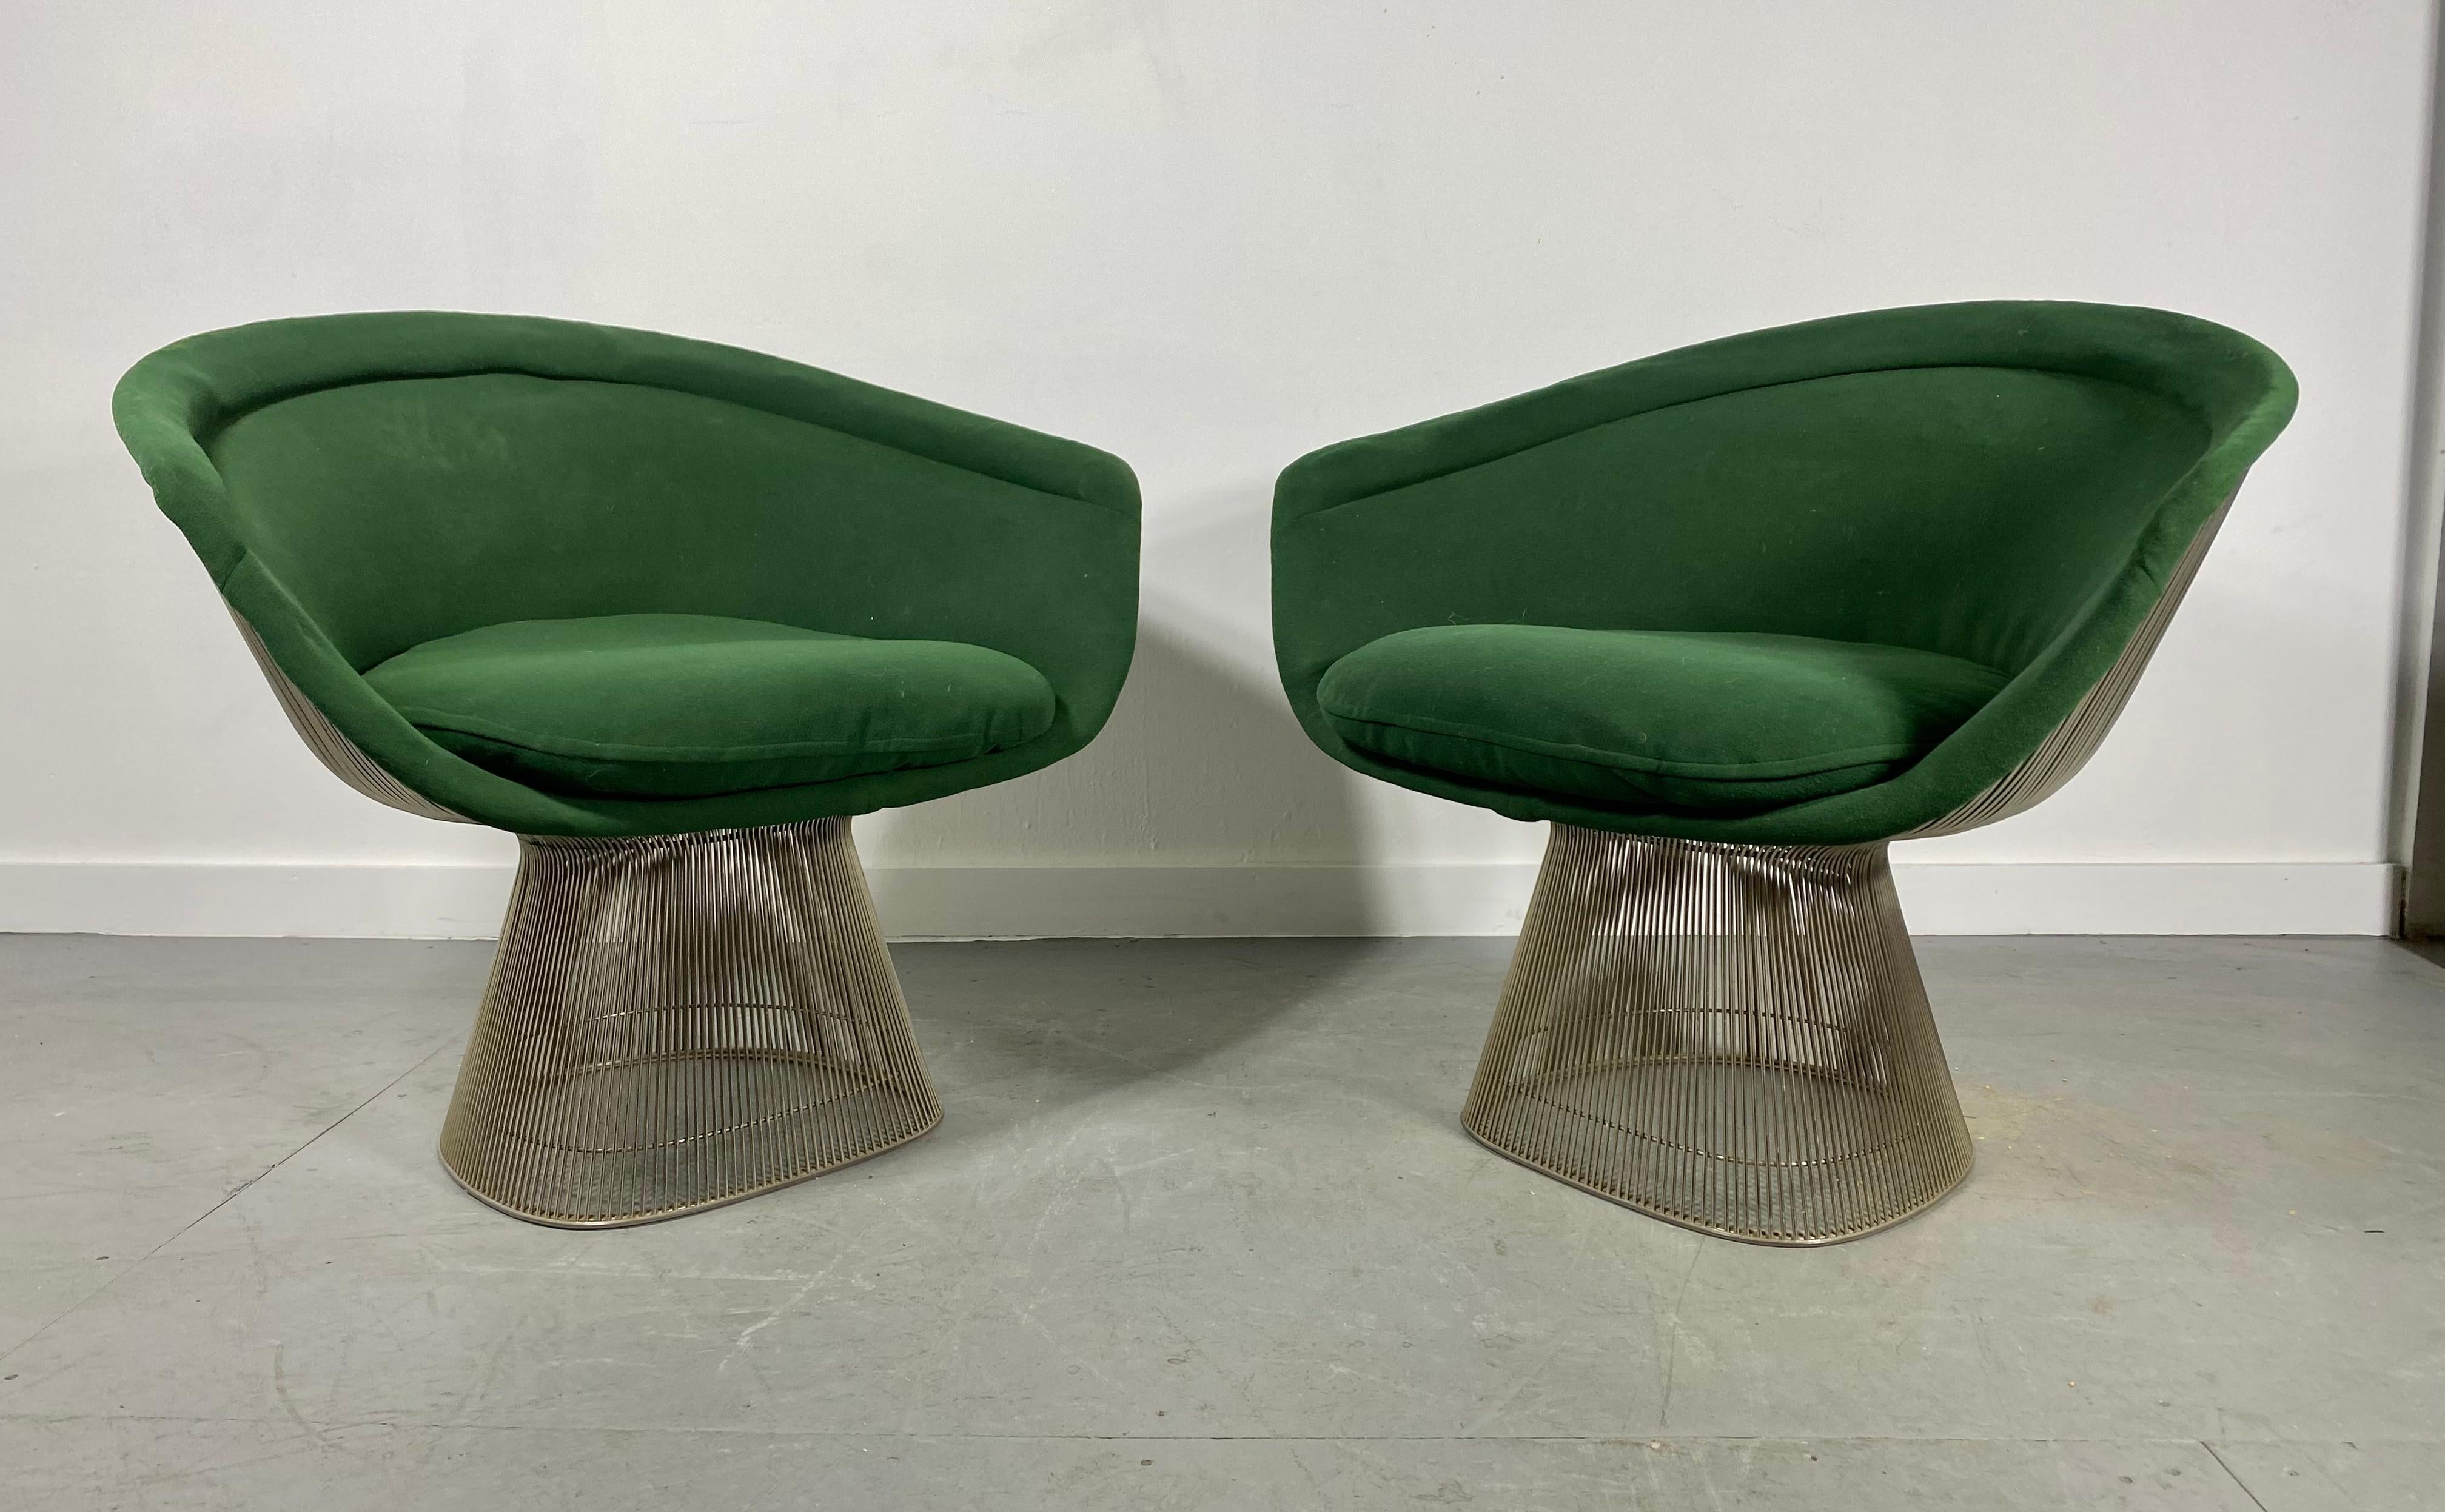 Pair Warren Platner Lounge Chairs, Classic Modernist, Manufactured by Knoll For Sale 3